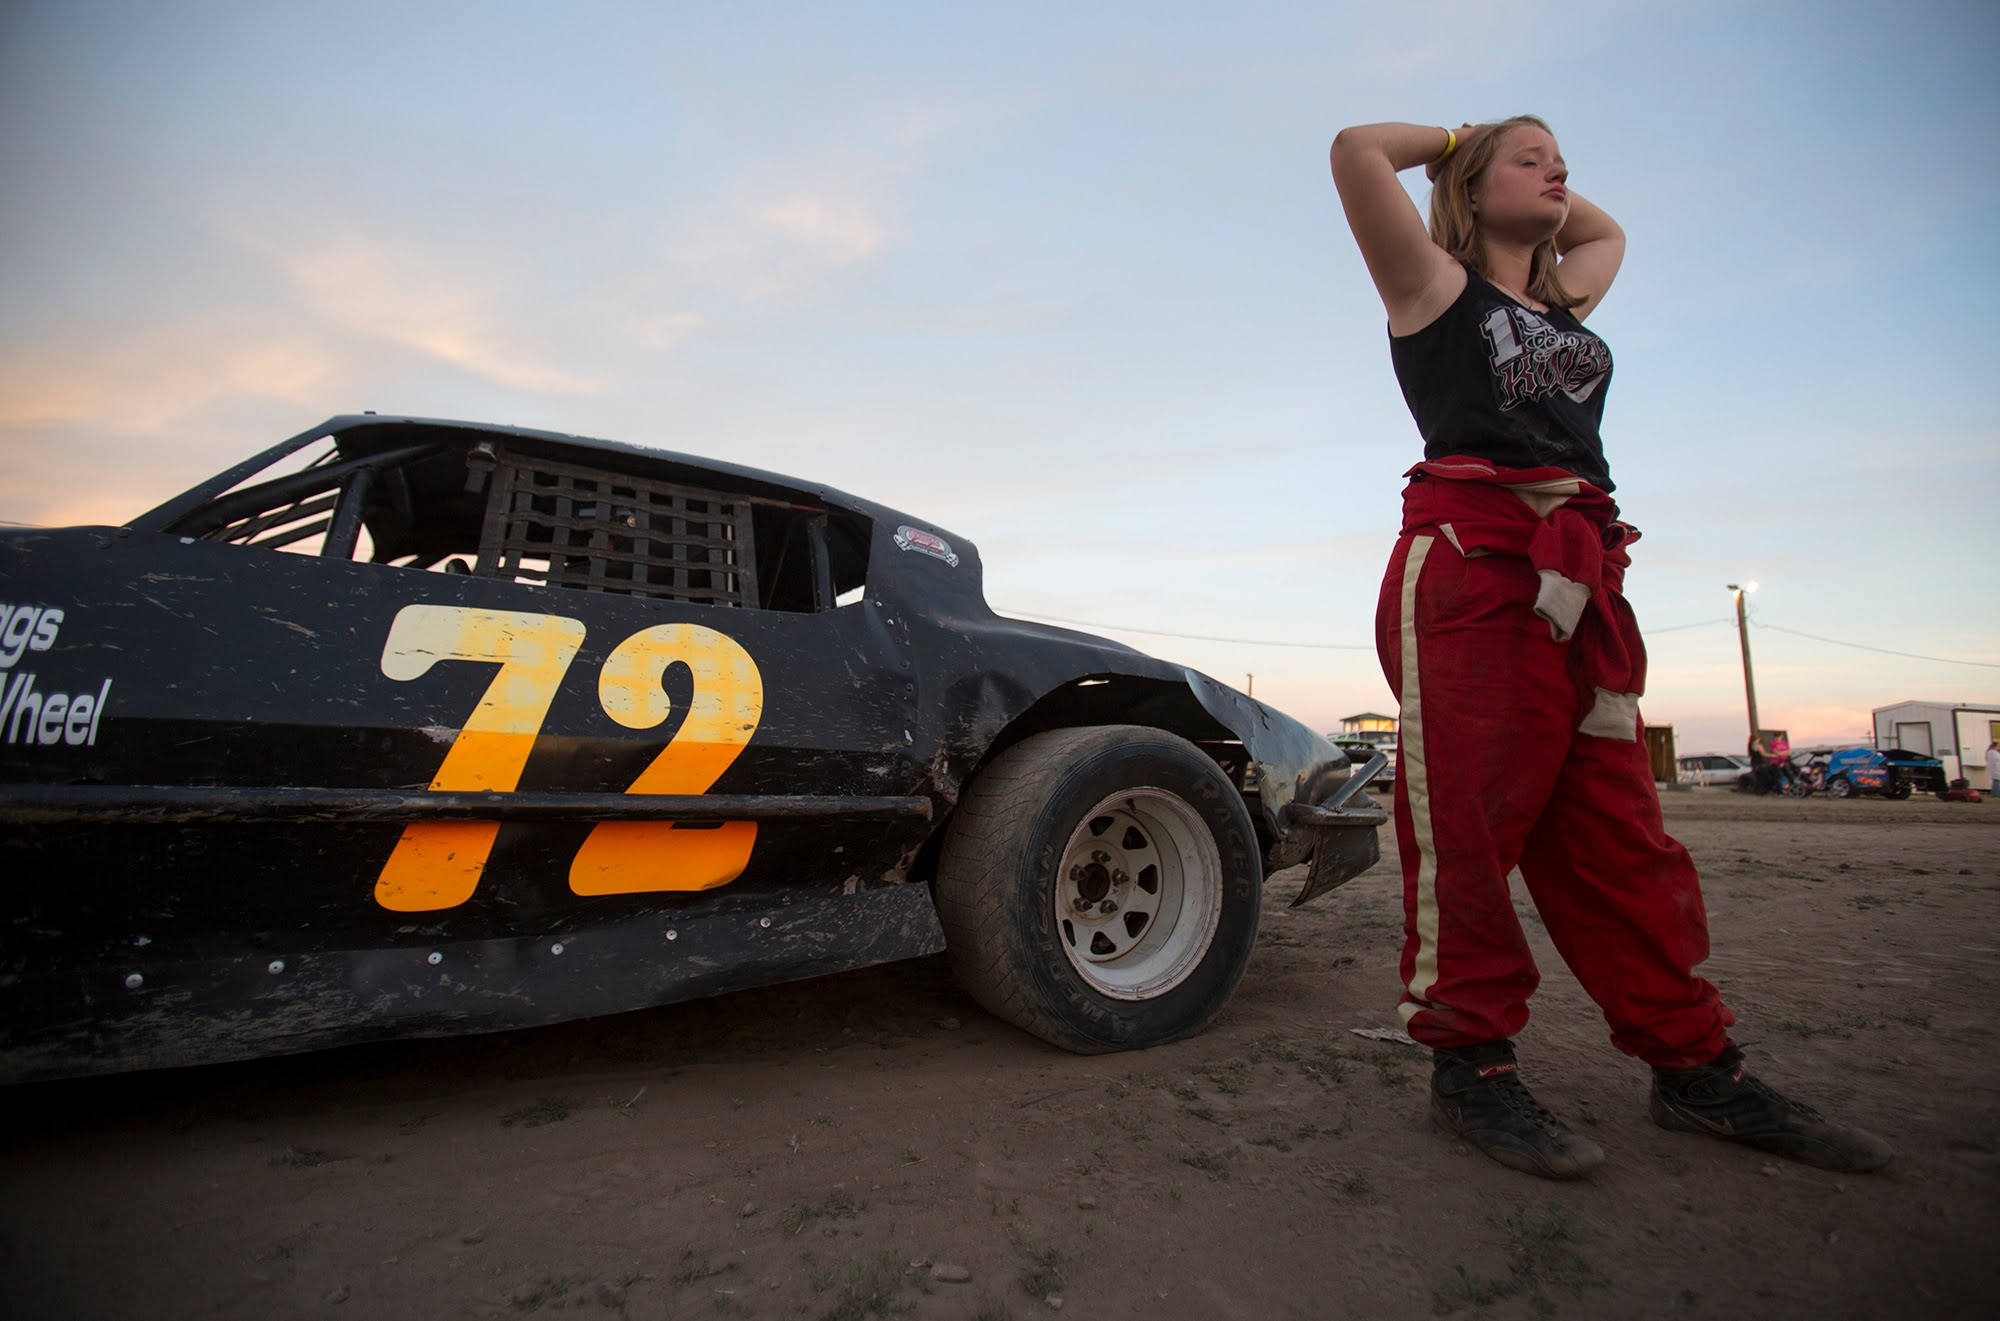 Kylee Pagel, 15-year-old race car driver - YouTube